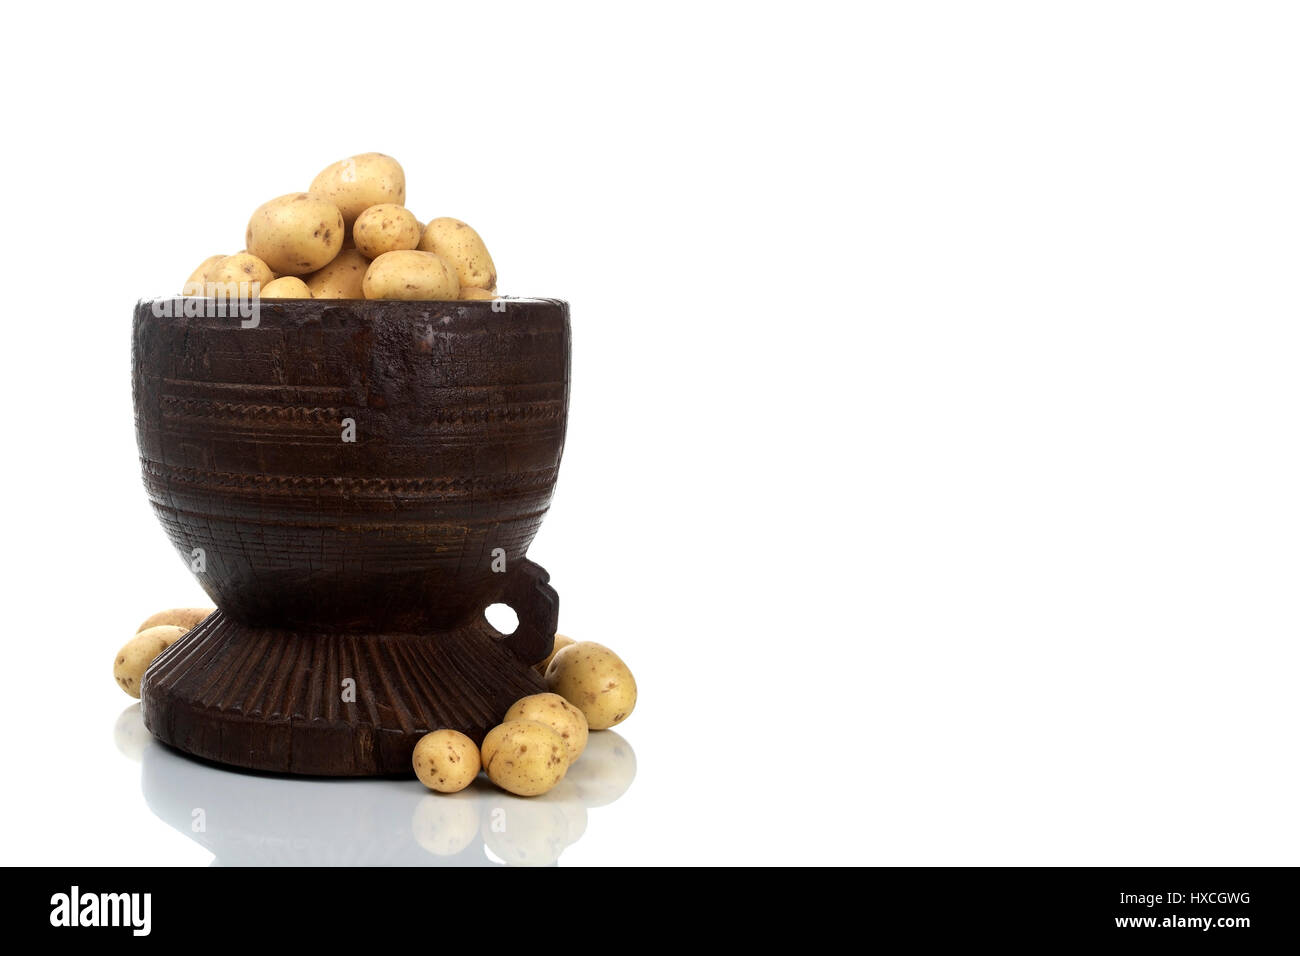 Wooden bowl with potatoes, Holzschale mit Kartoffeln Stock Photo